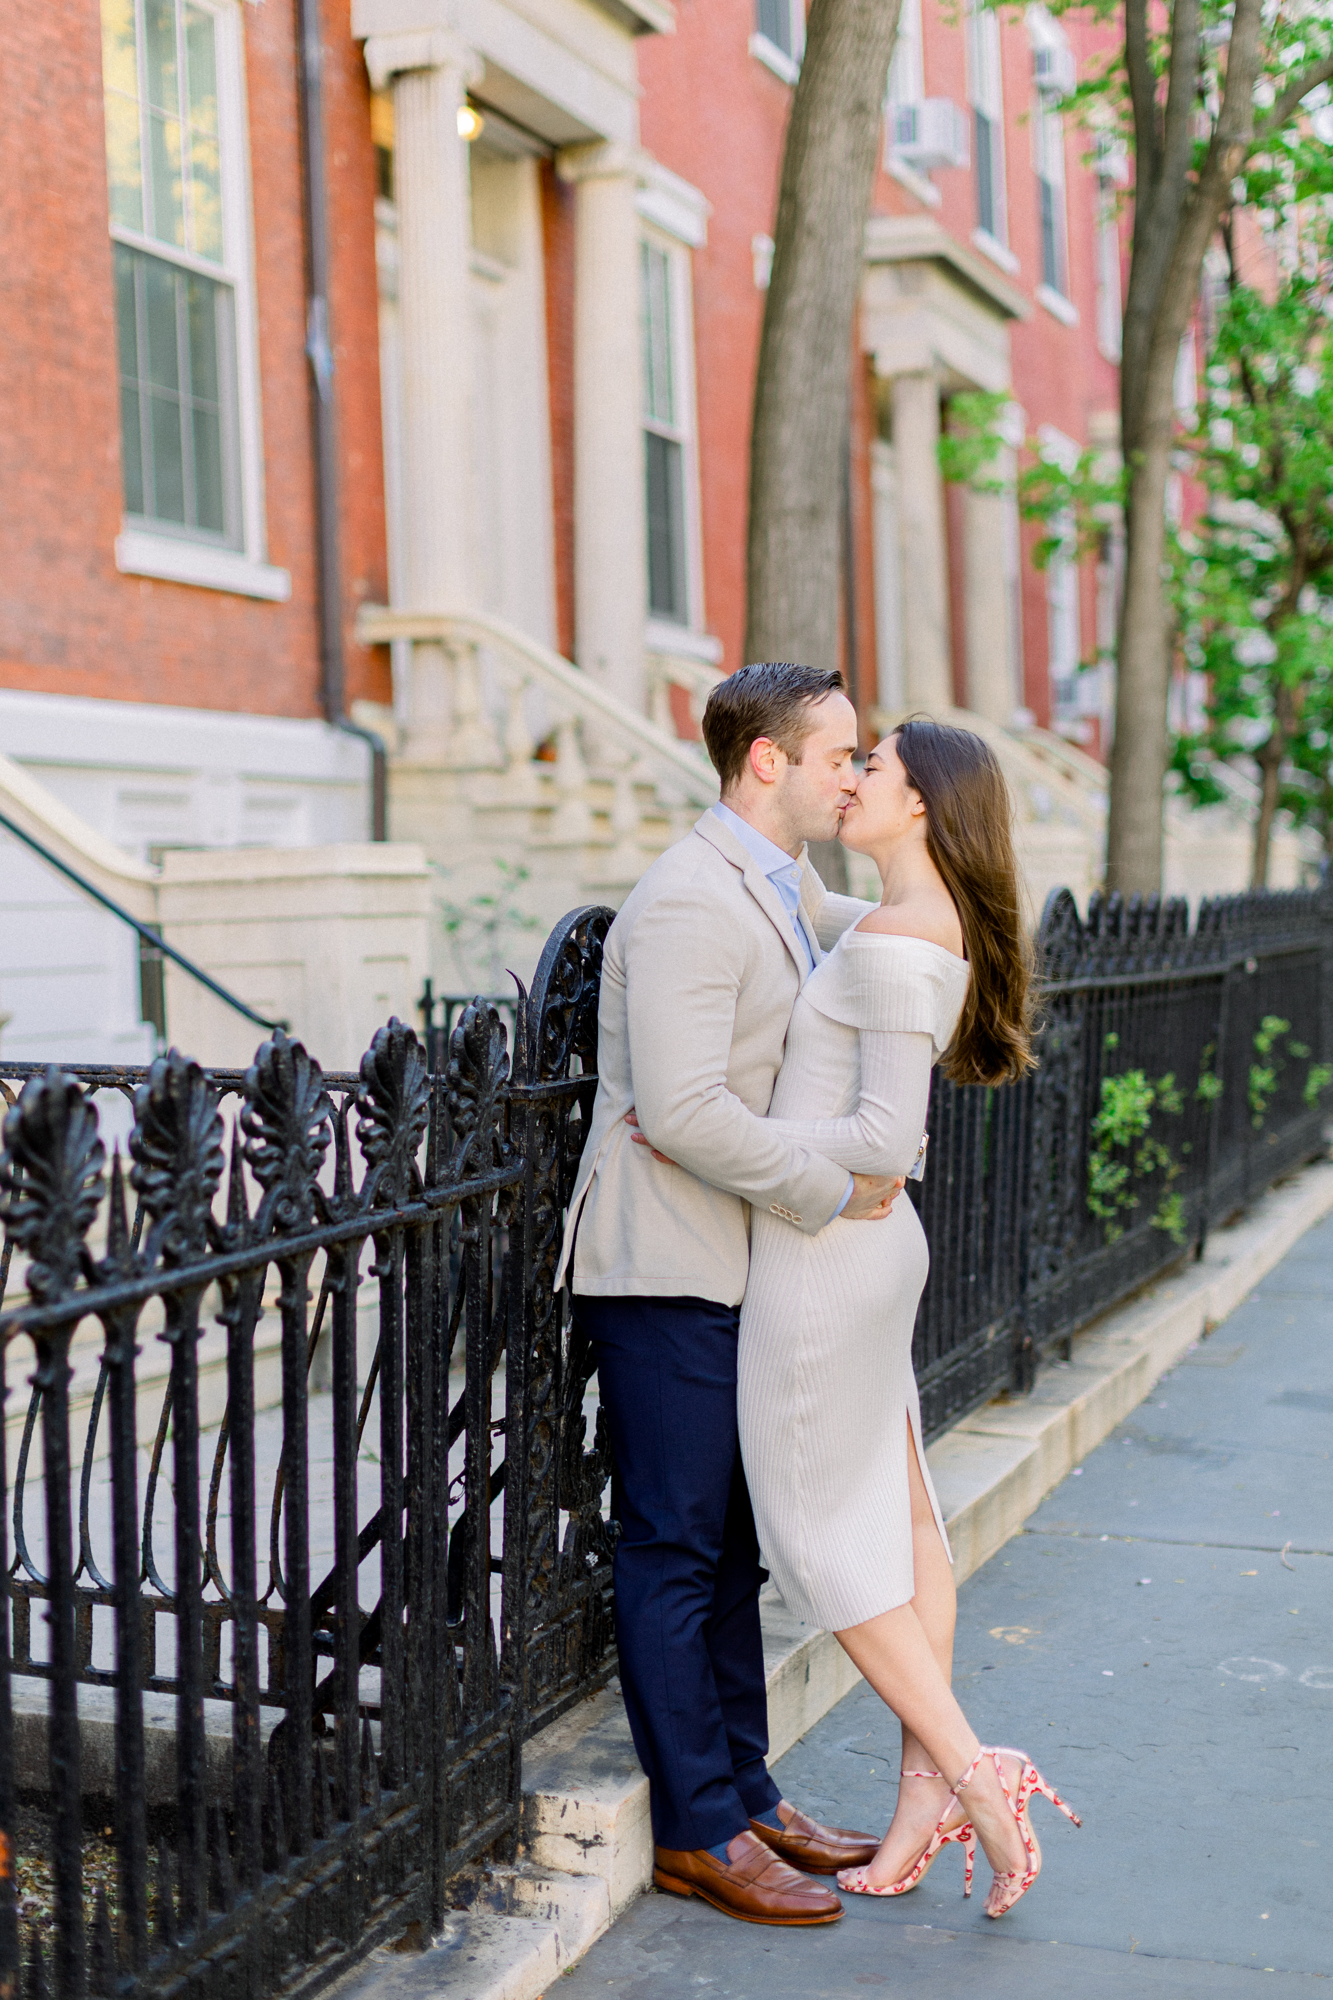 Sweet Spring Engagement Photos in Washington Square Park NYC